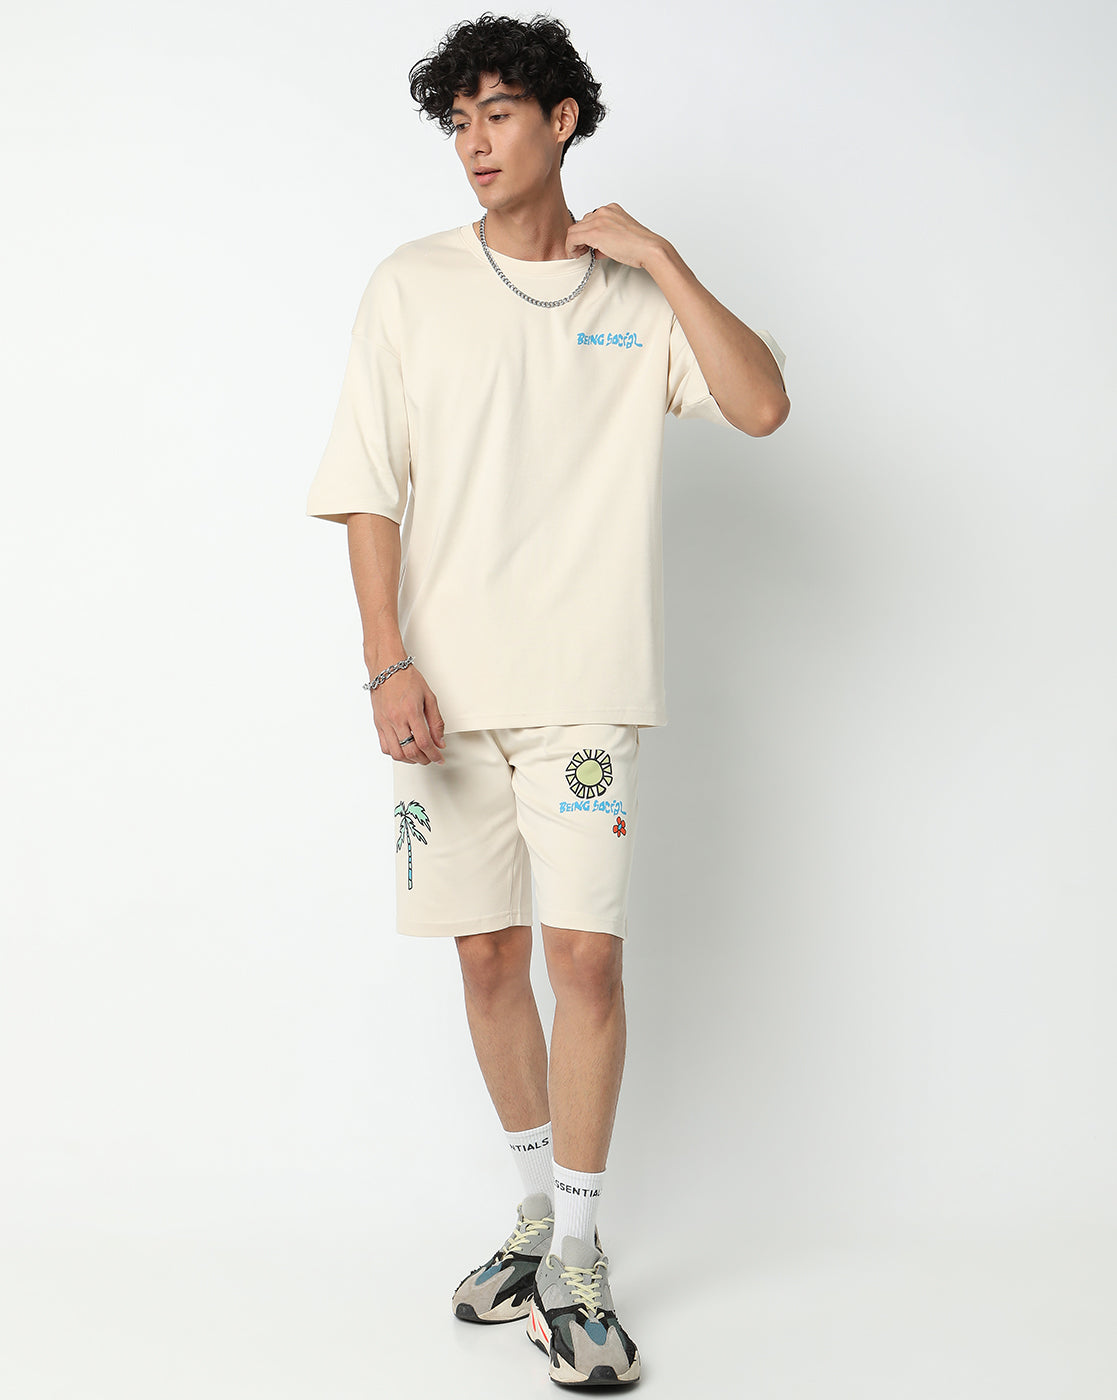 Off White Being Social Graphic Printed Oversized Co-ords